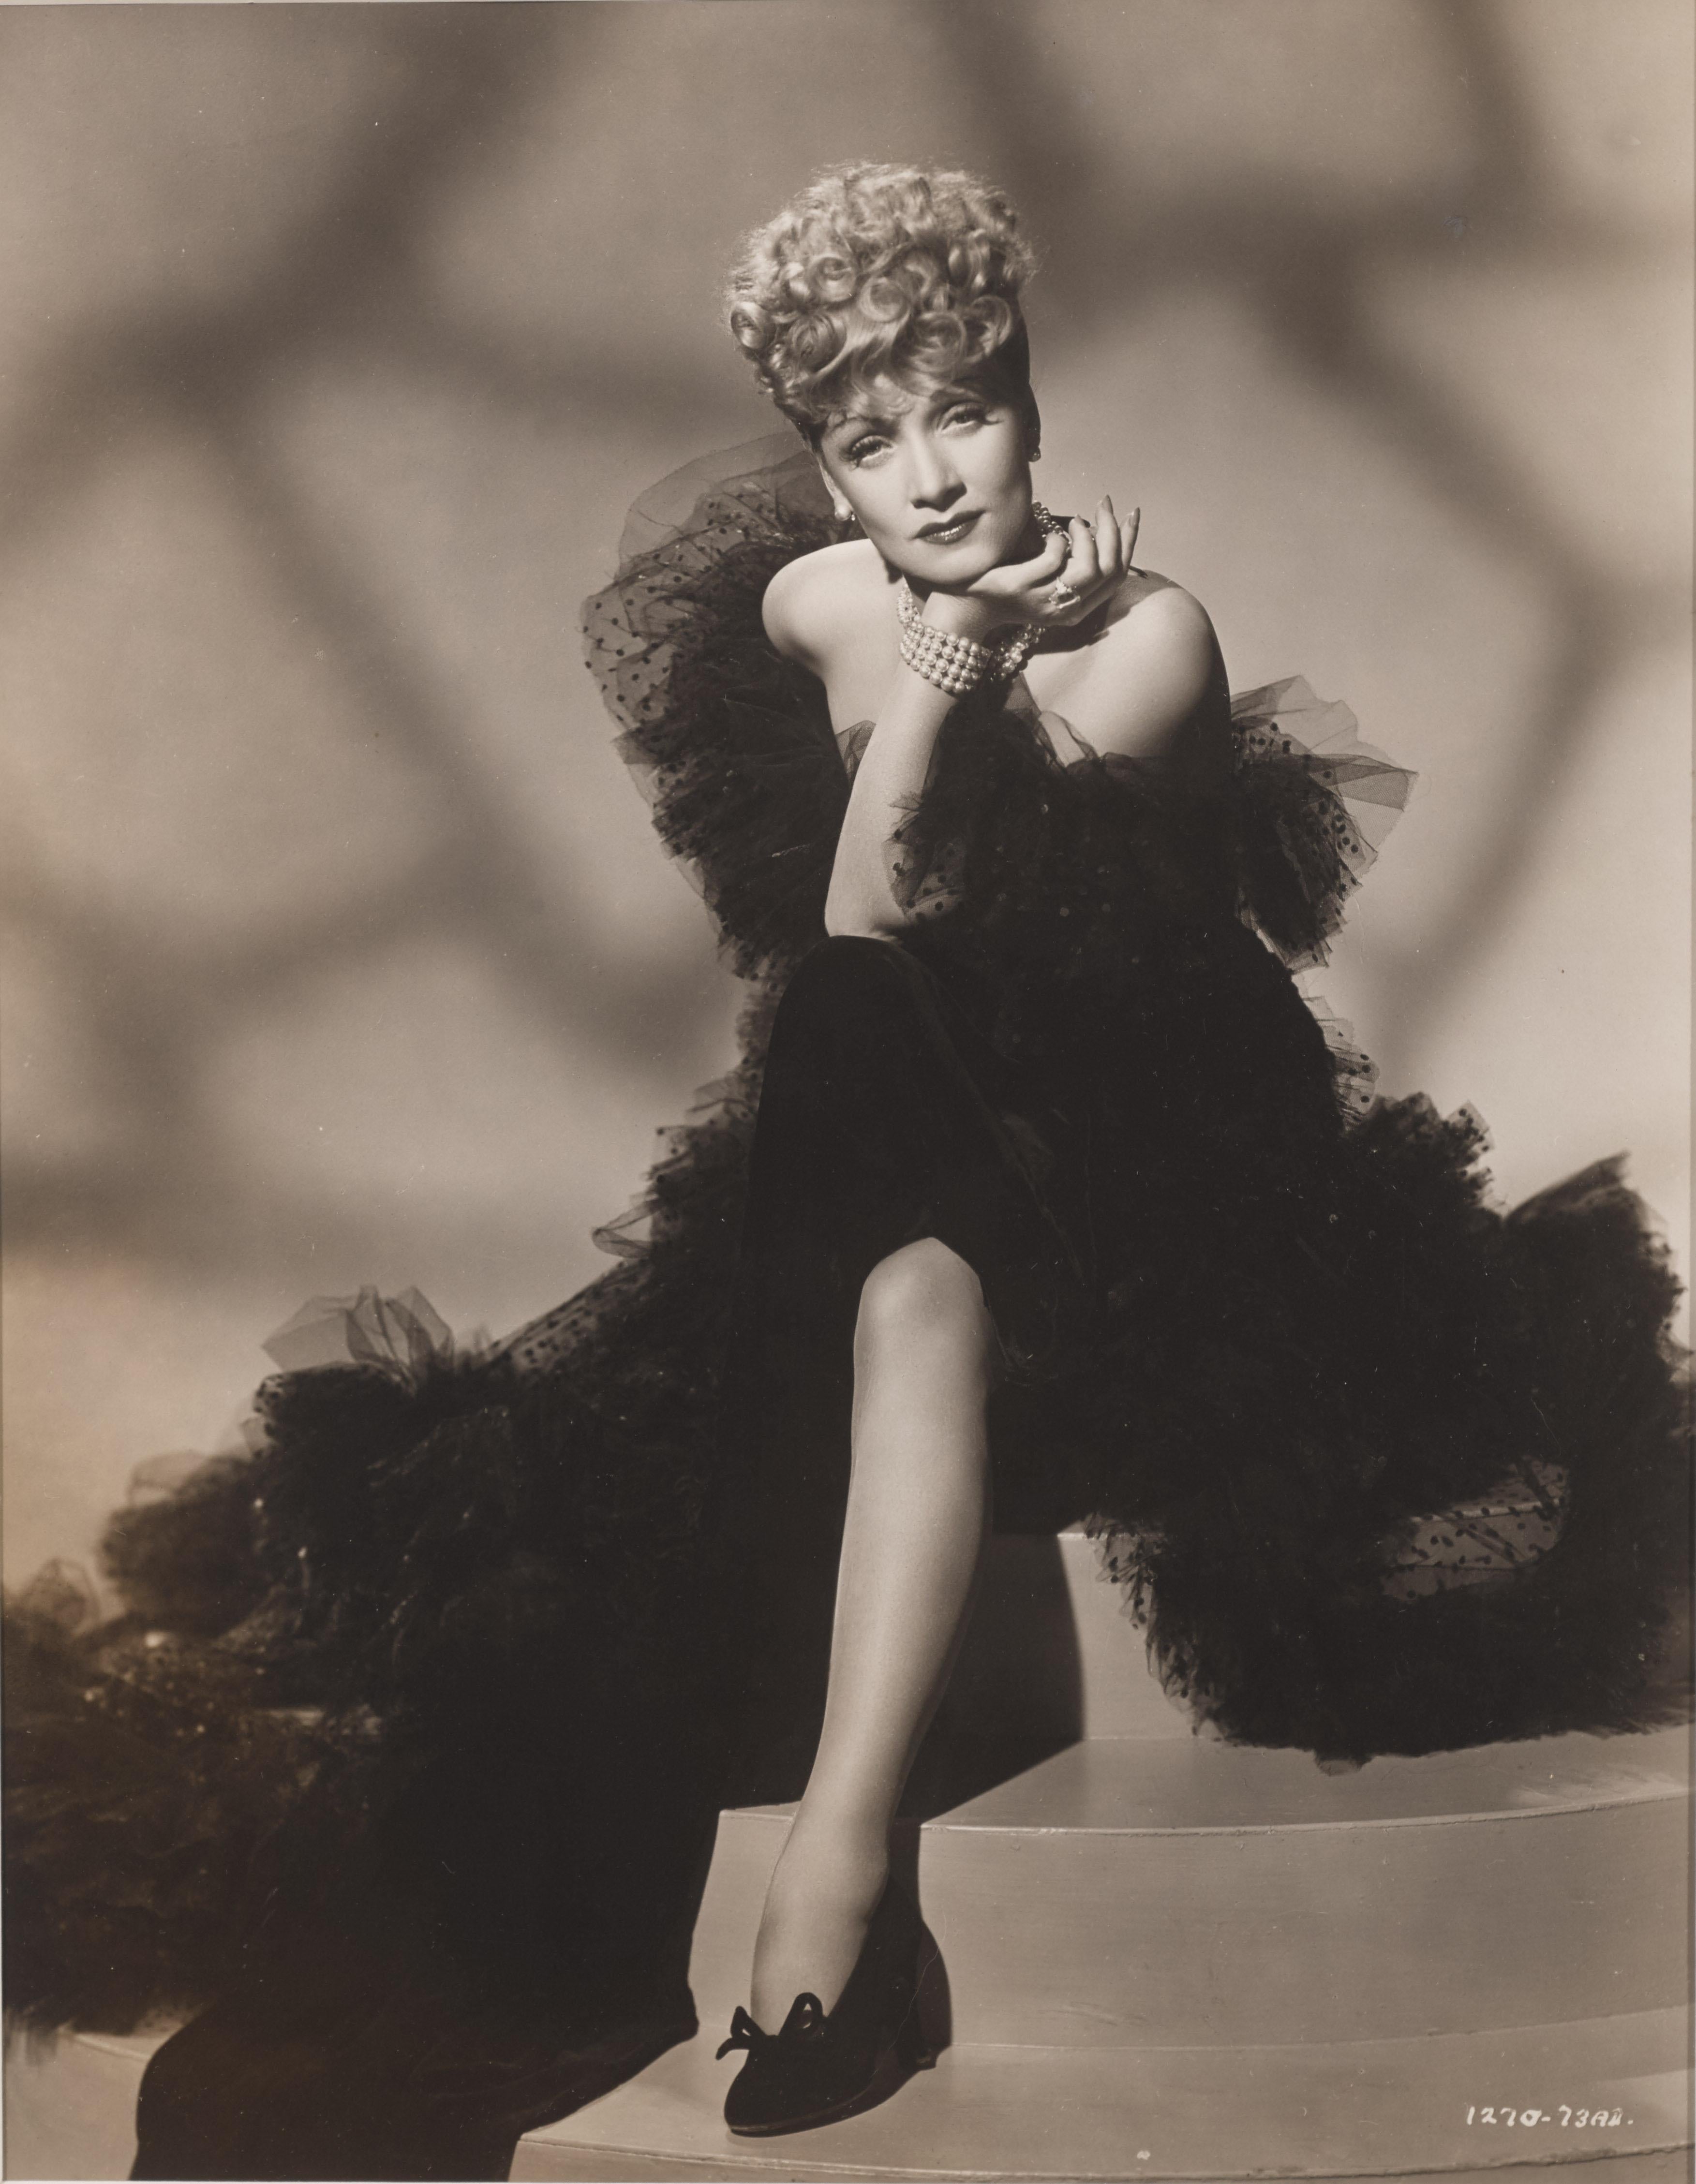 Original US oversized studio portrait photograph of Marlene Dietrich.
This piece is conservation framed in a Obeche wood frame with card mounts and UV plexiglas
The size given is before framing.
This piece would be packed and sent out in a strong